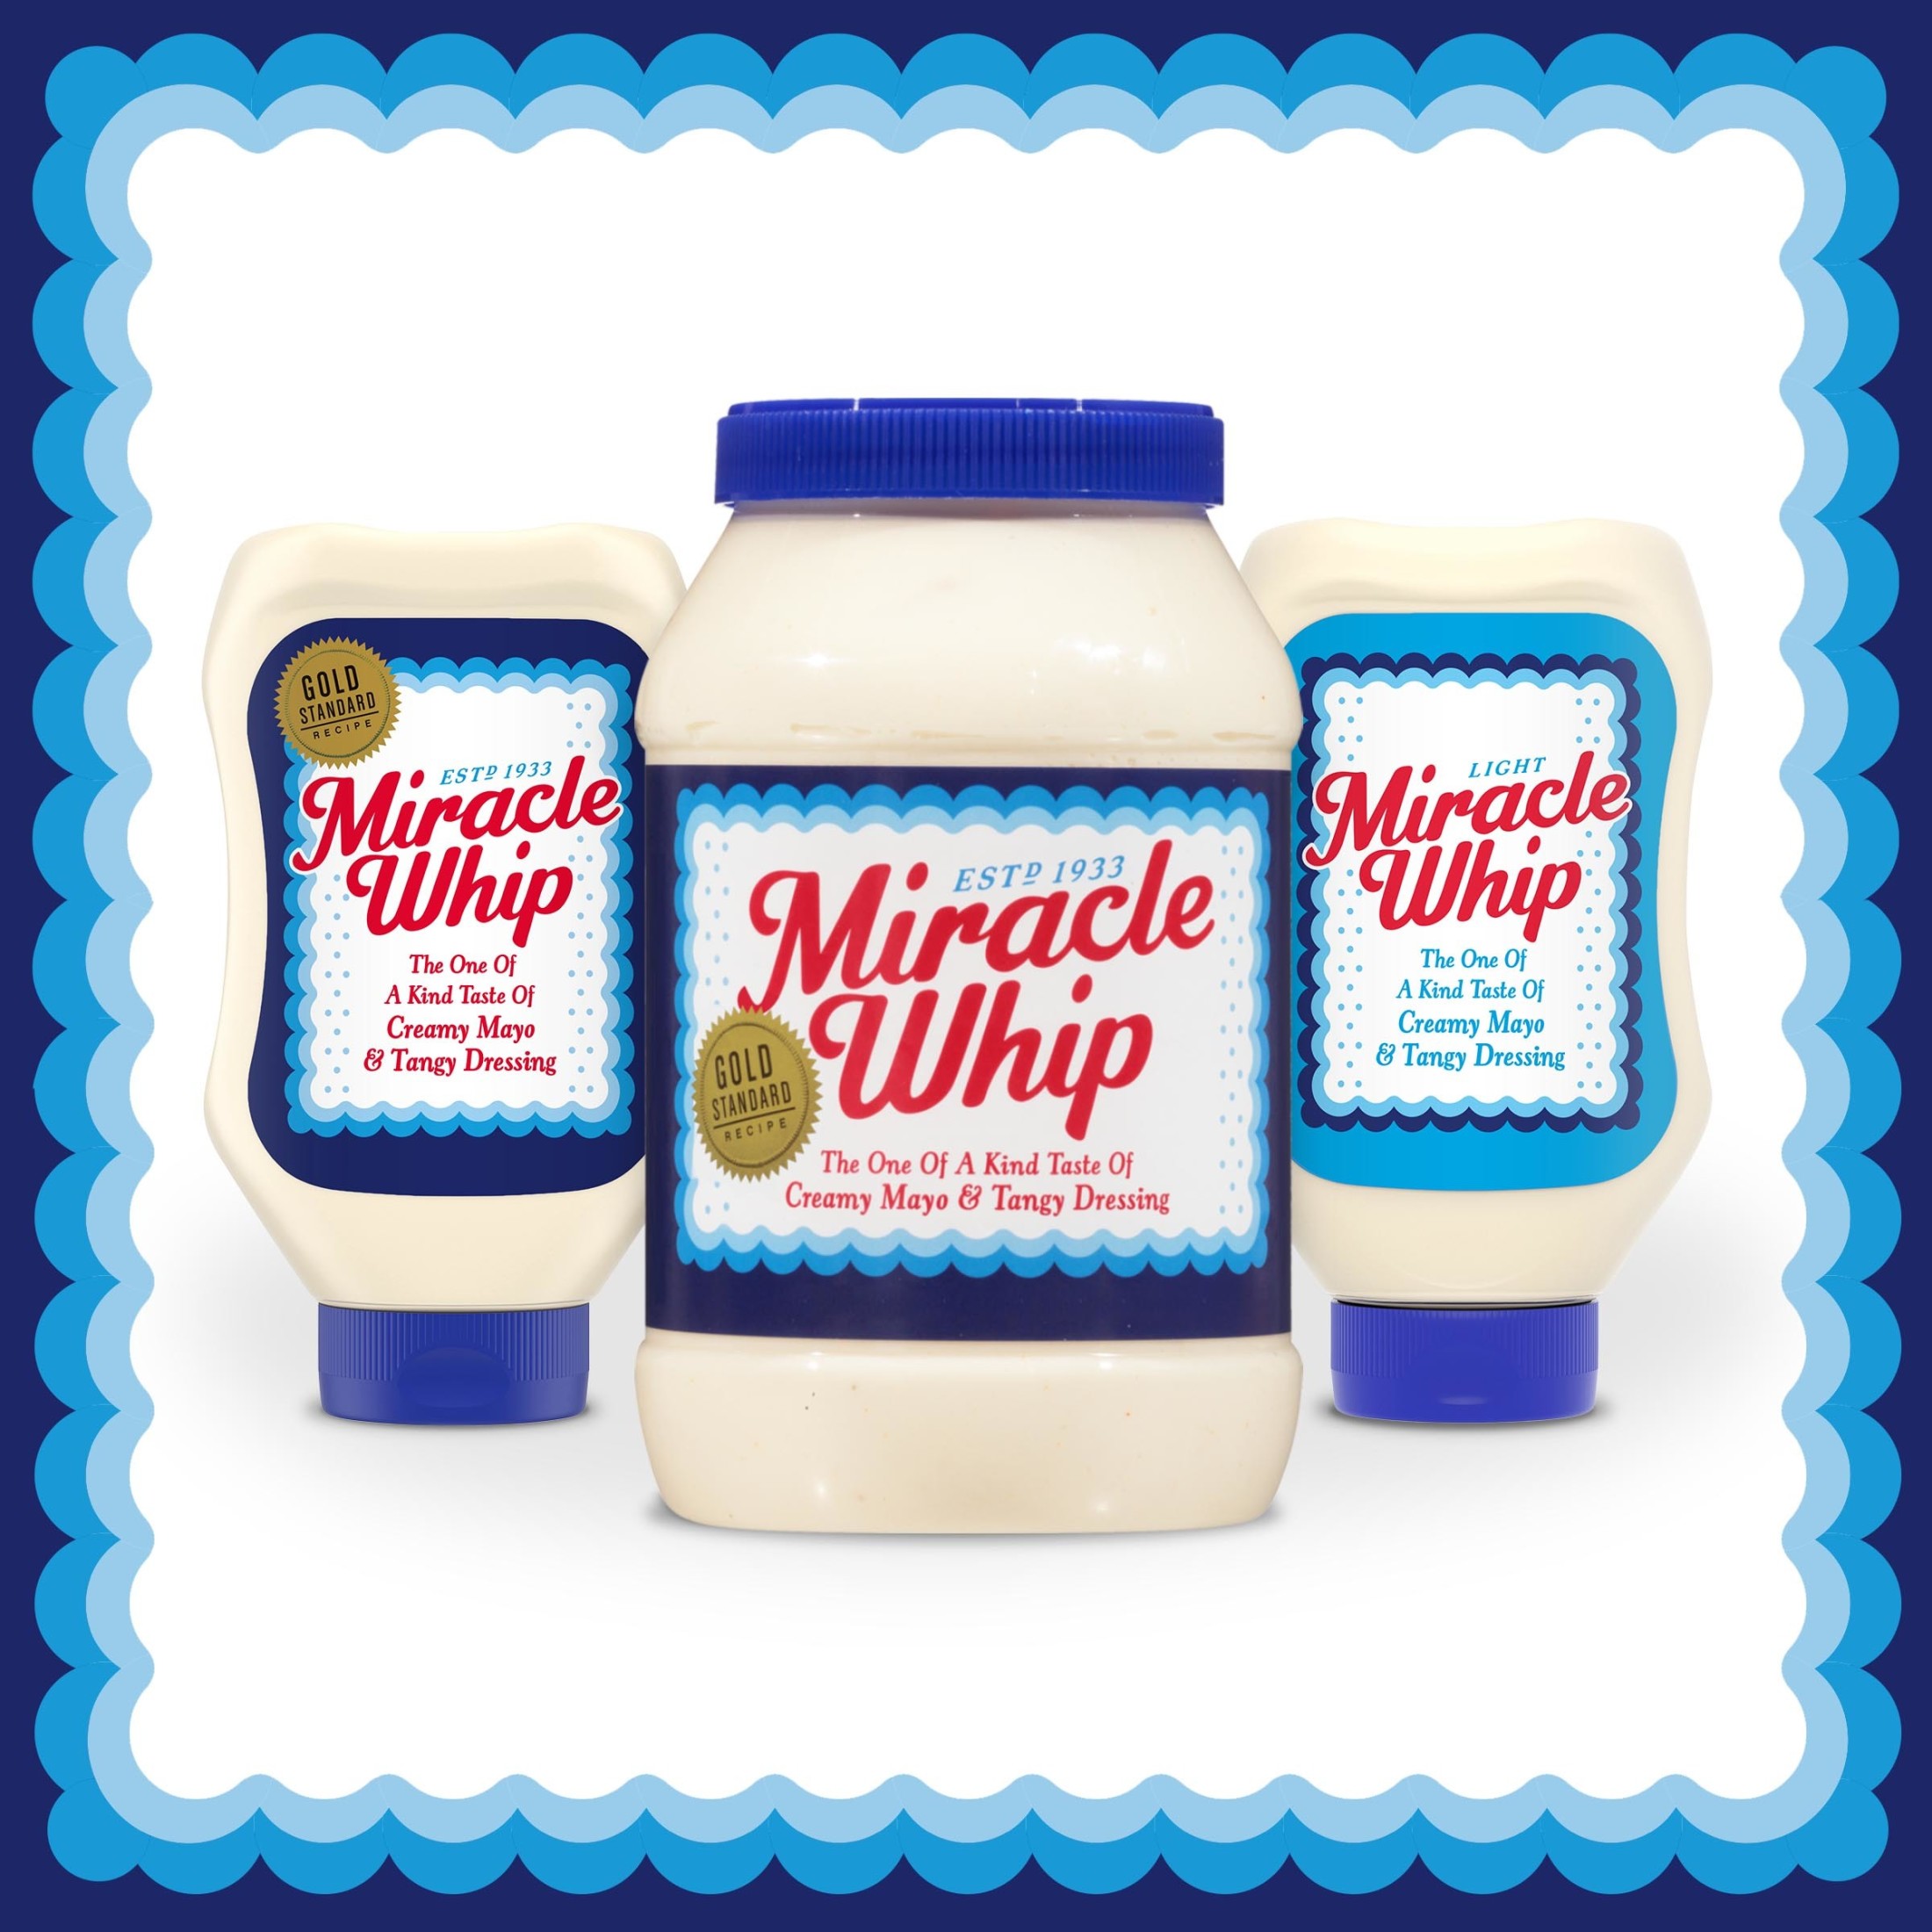 Miracle Whip Mayo-like Dressing, for a Keto and Low Carb Lifestyle, 30 fl oz Jar - image 11 of 16